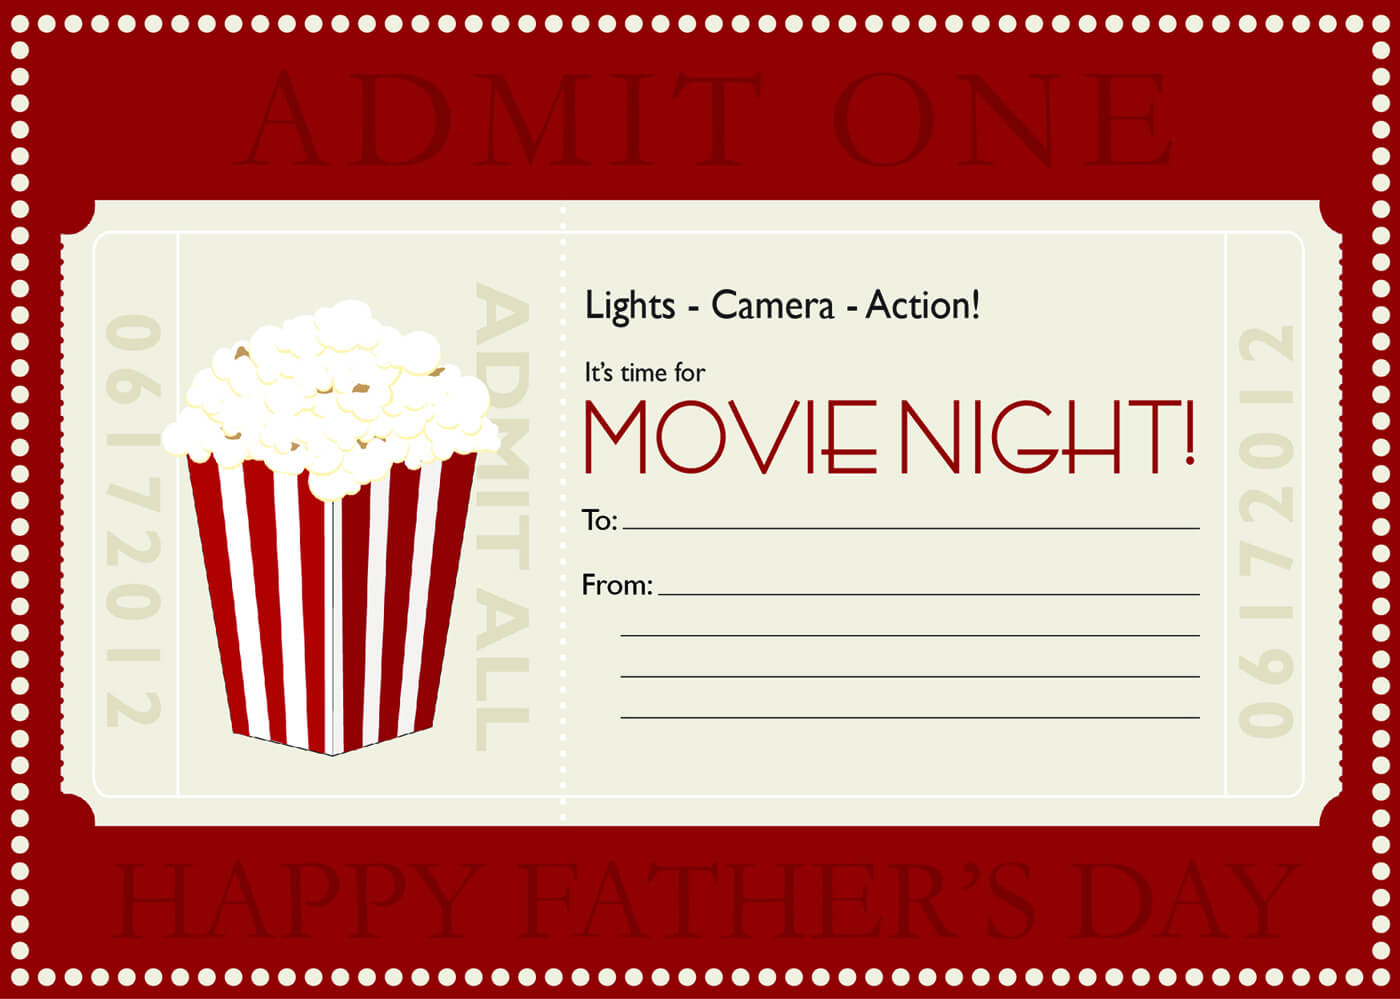 Movie Gift Certificate Templates | Gift Certificate Templates Regarding Movie Gift Certificate Template